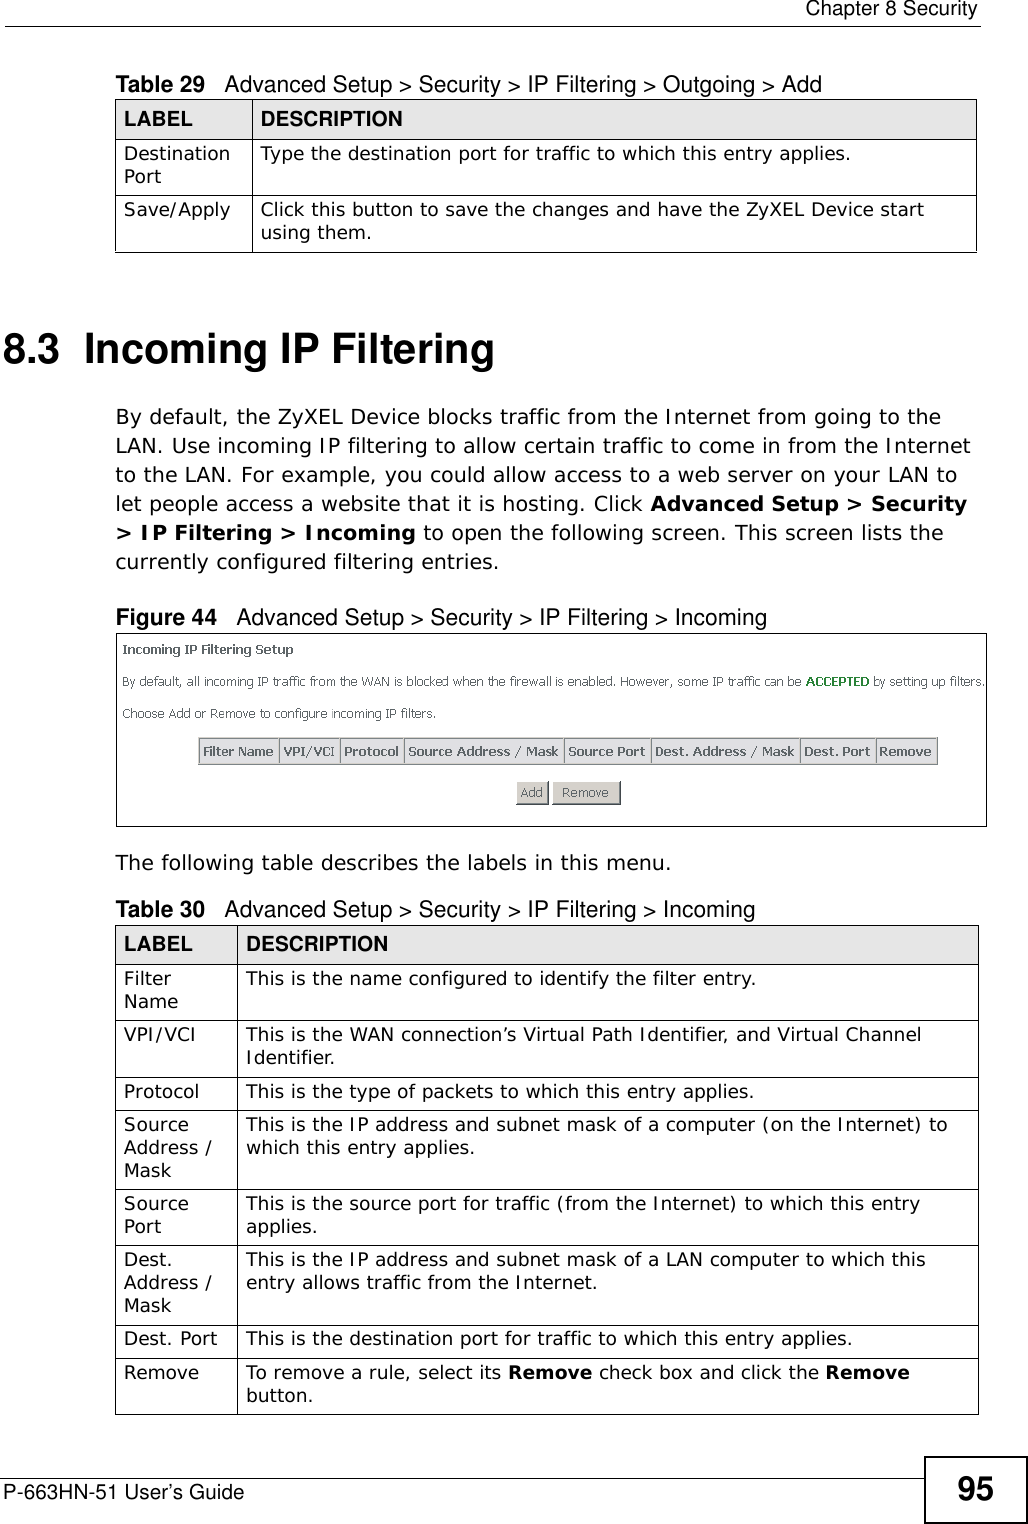  Chapter 8 SecurityP-663HN-51 User’s Guide 958.3  Incoming IP Filtering By default, the ZyXEL Device blocks traffic from the Internet from going to the LAN. Use incoming IP filtering to allow certain traffic to come in from the Internet to the LAN. For example, you could allow access to a web server on your LAN to let people access a website that it is hosting. Click Advanced Setup &gt; Security &gt; IP Filtering &gt; Incoming to open the following screen. This screen lists the currently configured filtering entries. Figure 44   Advanced Setup &gt; Security &gt; IP Filtering &gt; IncomingThe following table describes the labels in this menu.Destination Port Type the destination port for traffic to which this entry applies.Save/Apply Click this button to save the changes and have the ZyXEL Device start using them.Table 29   Advanced Setup &gt; Security &gt; IP Filtering &gt; Outgoing &gt; AddLABEL DESCRIPTIONTable 30   Advanced Setup &gt; Security &gt; IP Filtering &gt; IncomingLABEL DESCRIPTIONFilter Name This is the name configured to identify the filter entry.VPI/VCI This is the WAN connection’s Virtual Path Identifier, and Virtual Channel Identifier. Protocol This is the type of packets to which this entry applies. Source Address / MaskThis is the IP address and subnet mask of a computer (on the Internet) to which this entry applies.Source Port This is the source port for traffic (from the Internet) to which this entry applies.Dest. Address / MaskThis is the IP address and subnet mask of a LAN computer to which this entry allows traffic from the Internet.Dest. Port This is the destination port for traffic to which this entry applies.Remove To remove a rule, select its Remove check box and click the Remove button. 